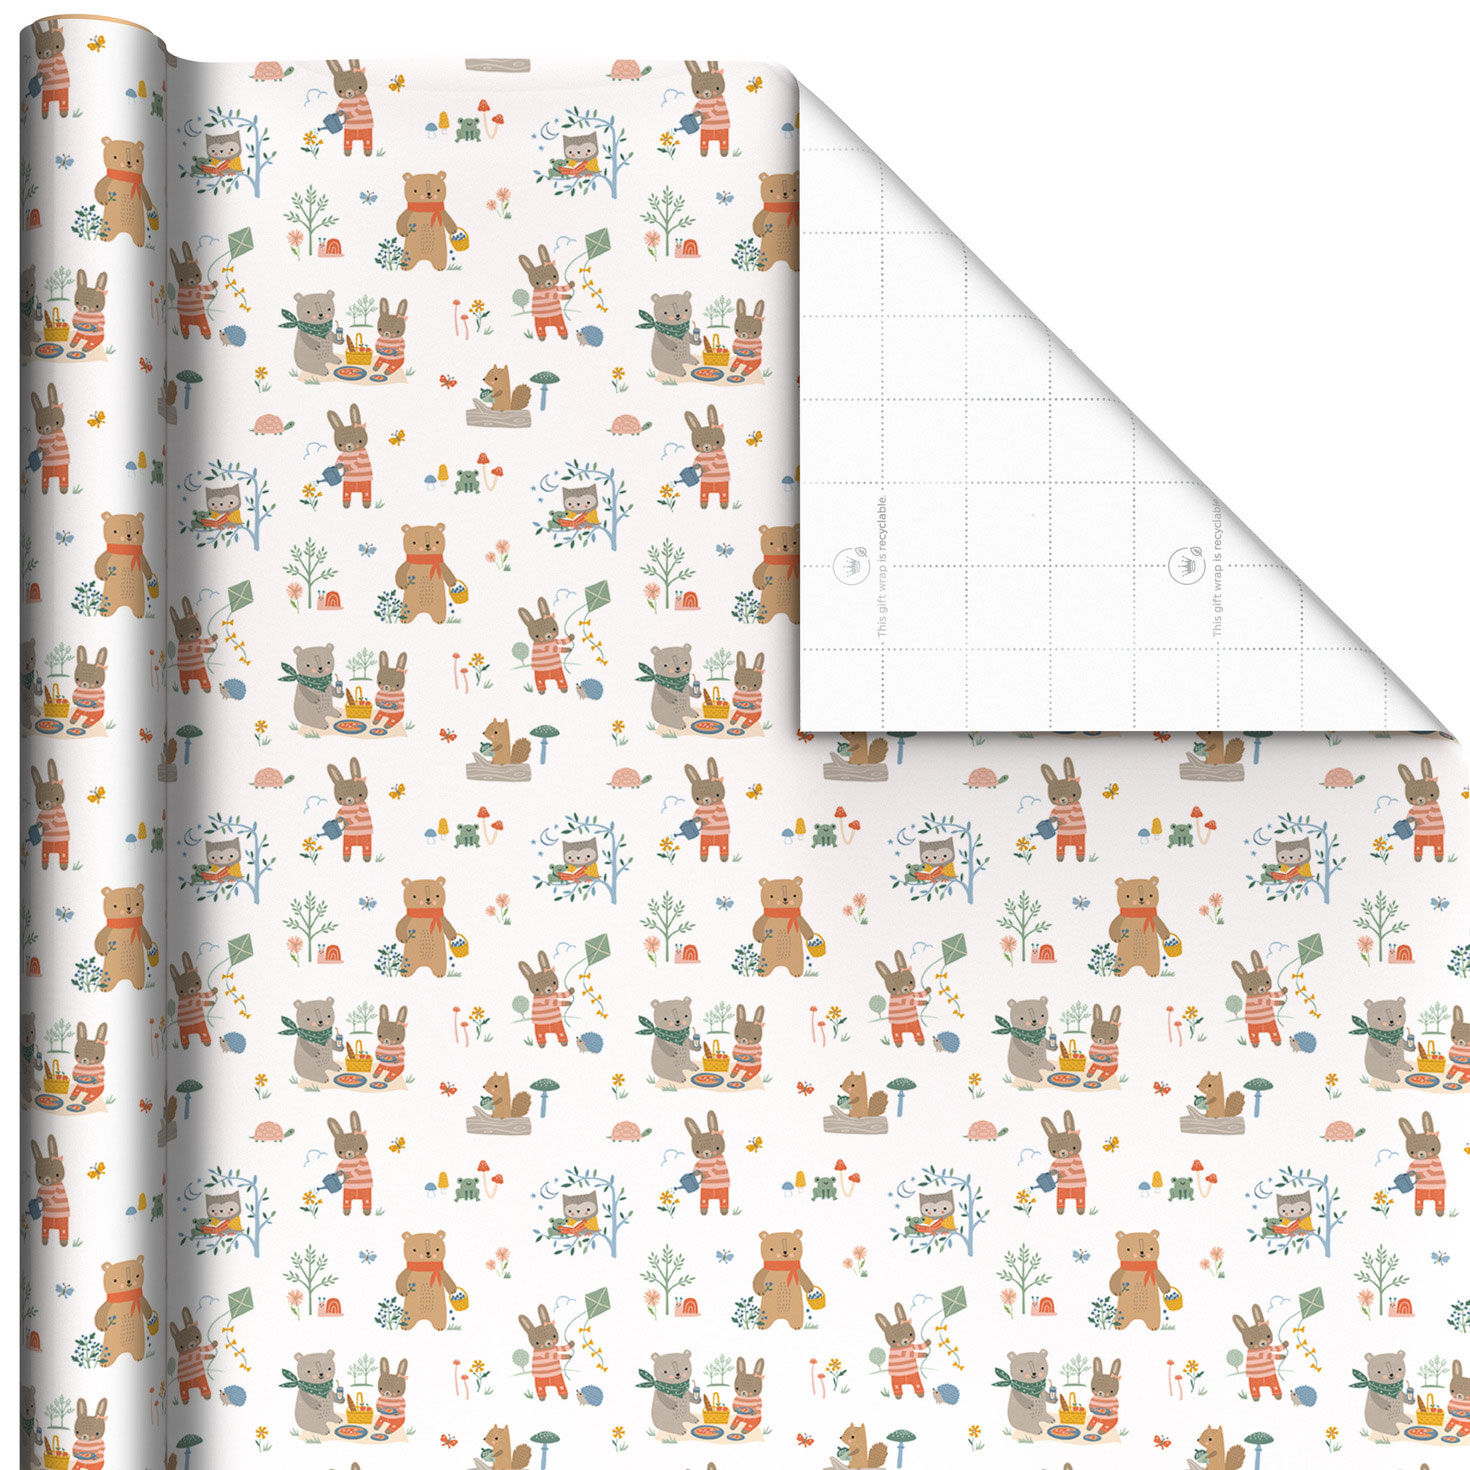 Bear and Bunny Picnic Wrapping Paper, 20 sq. ft. for only USD 4.99 | Hallmark